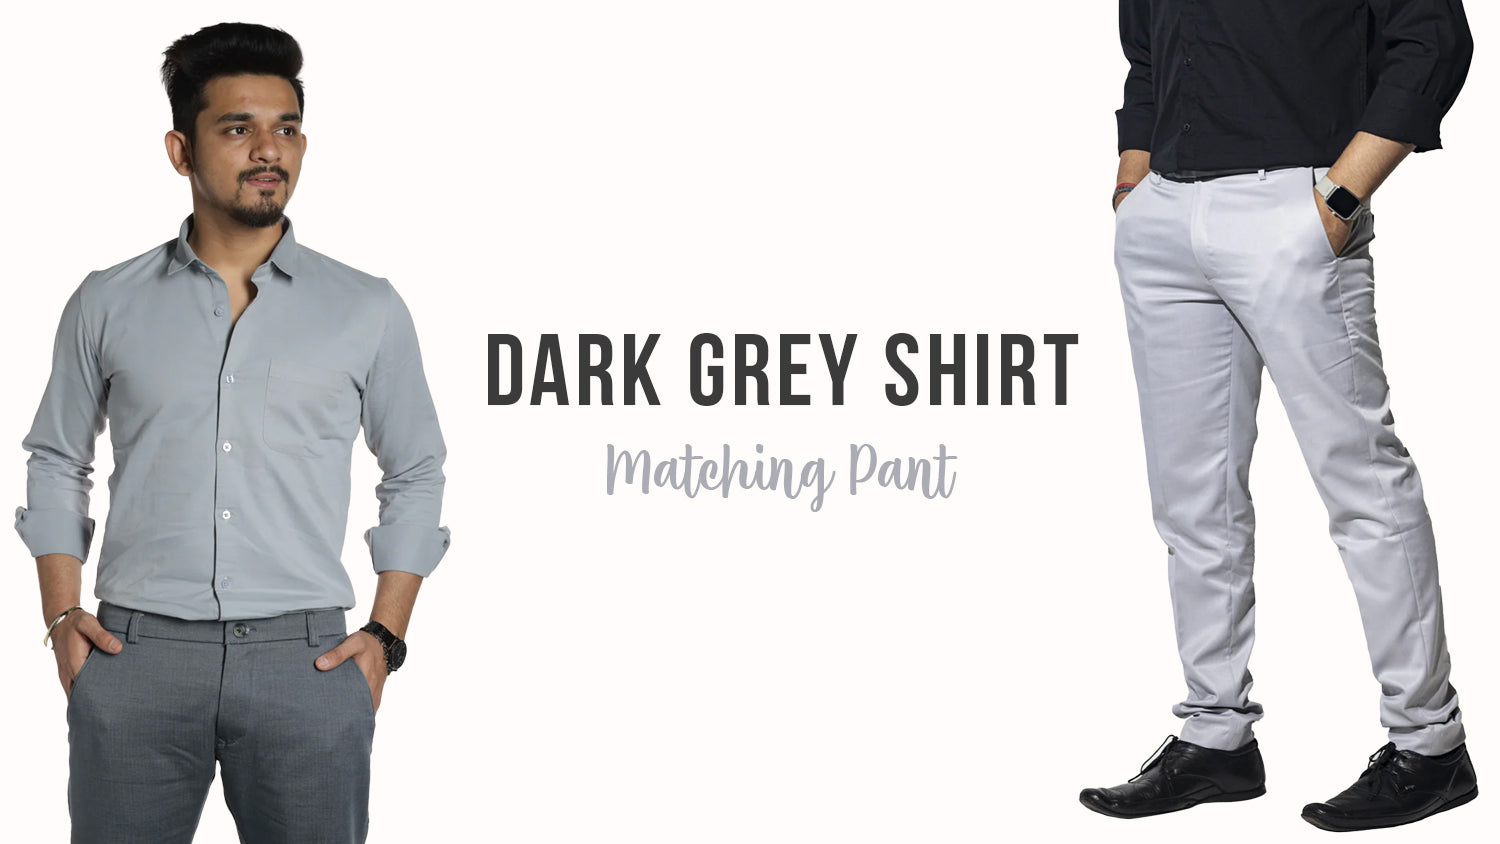 Perfect Pairing: Black Shirt Matching Pants for Effortless Style